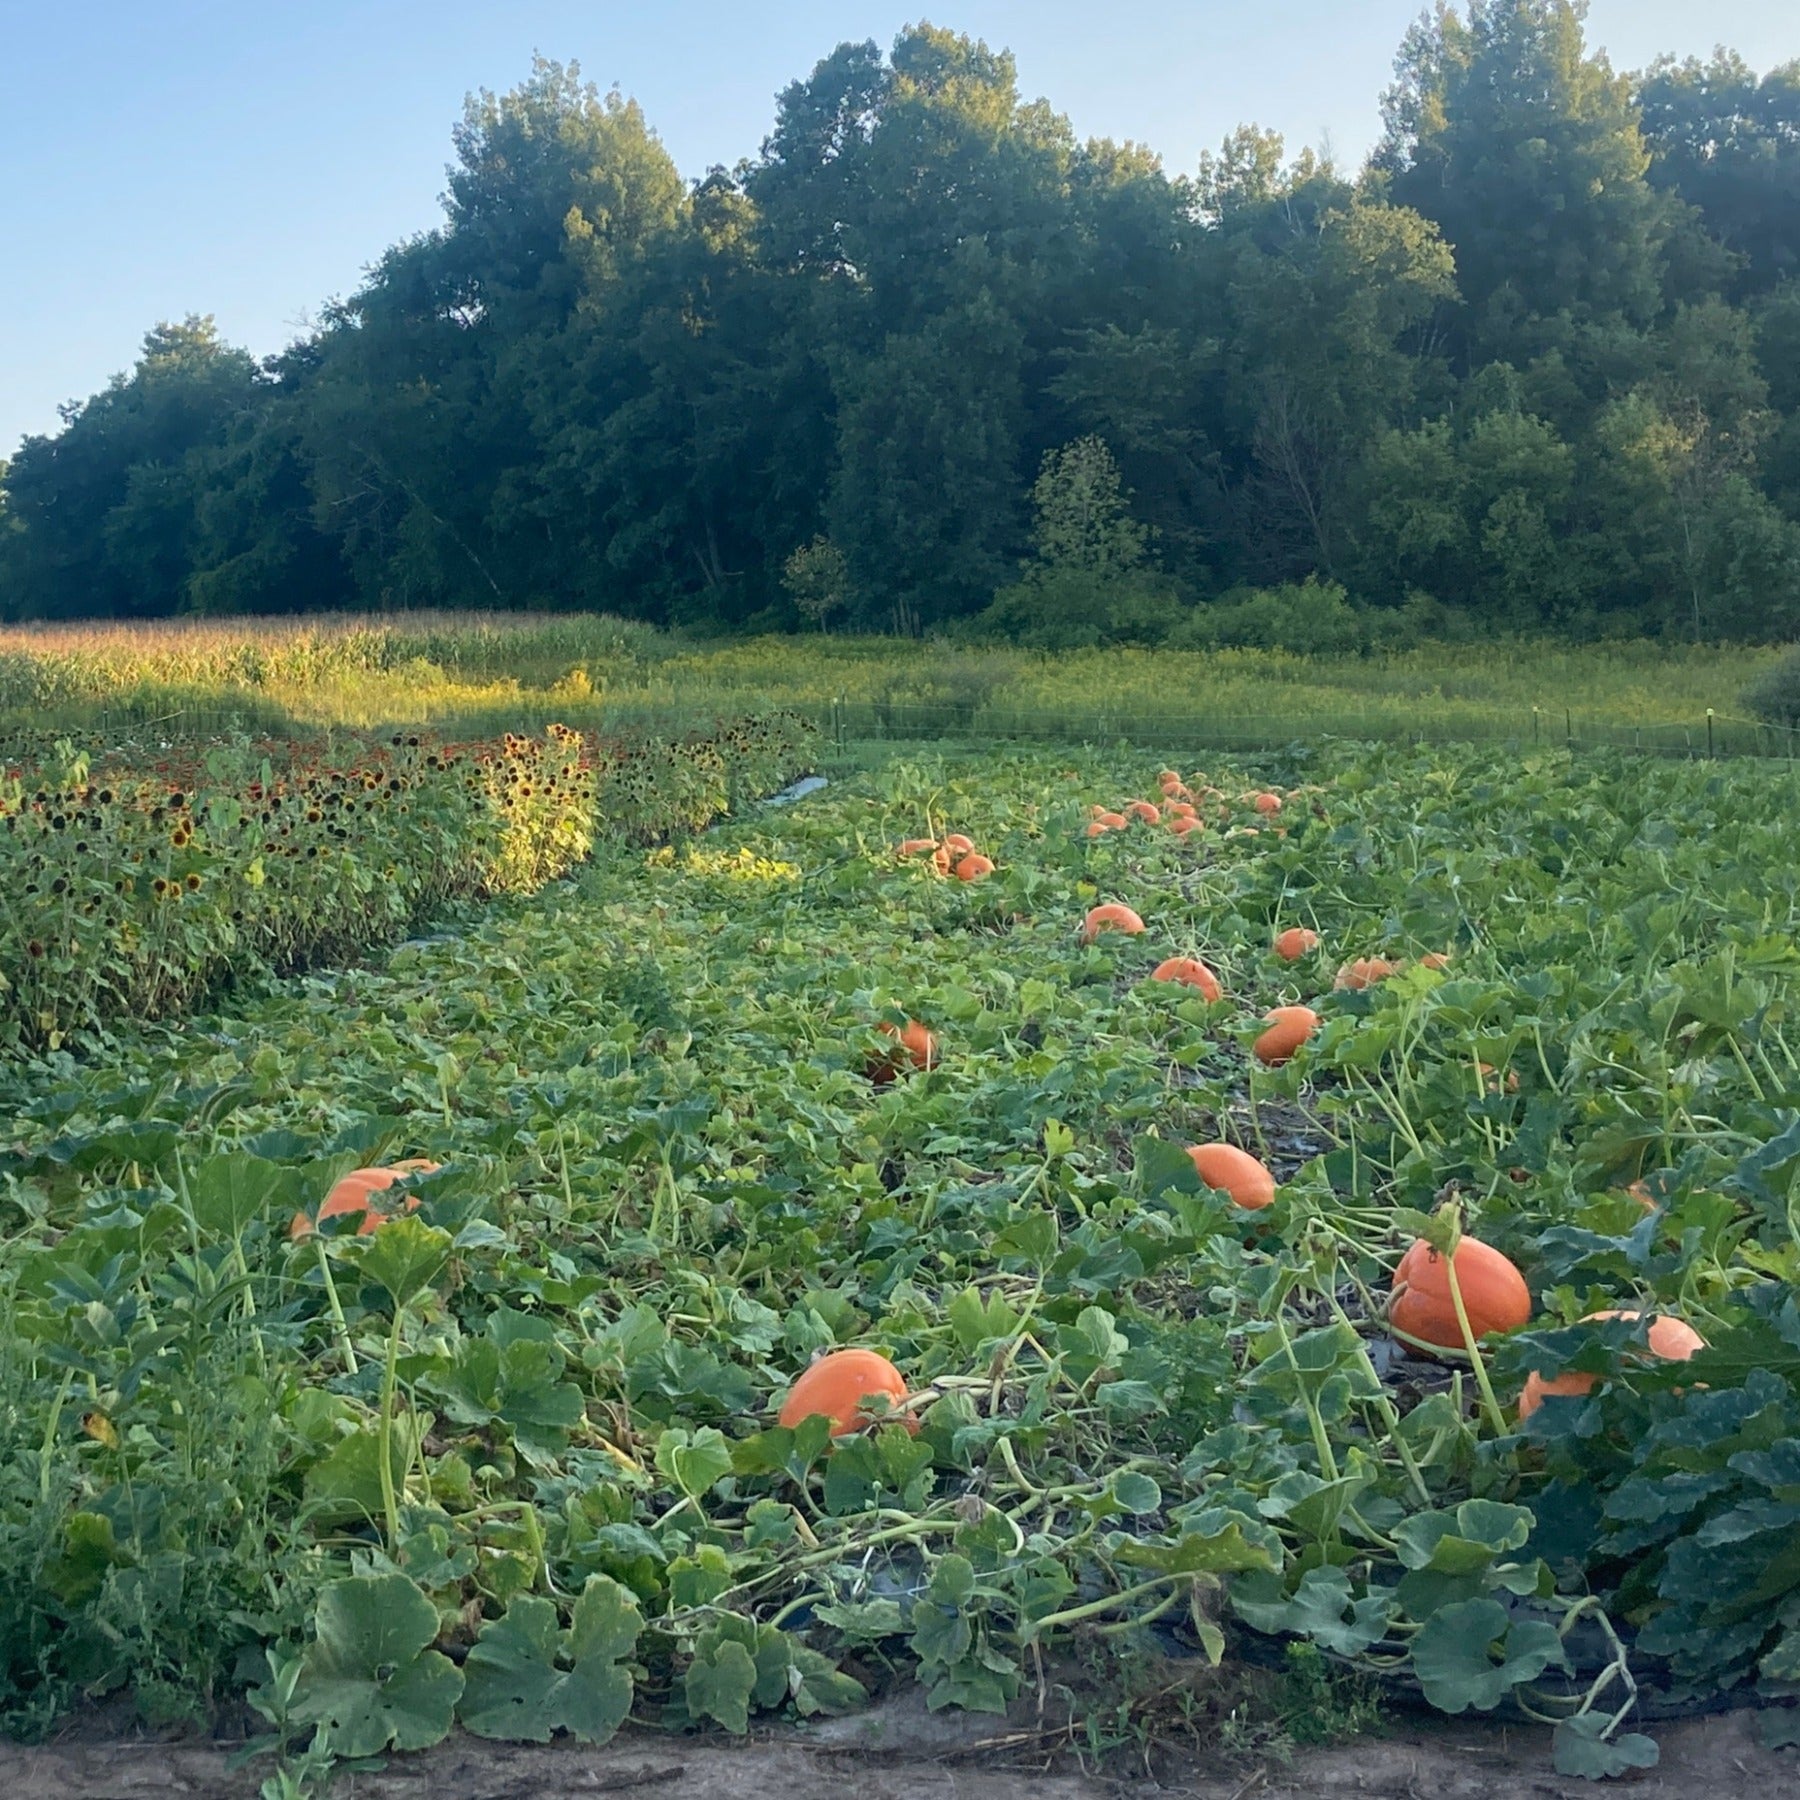 WC Giant Pumpkins in a field with sunflowers and zucchini and cucumbers